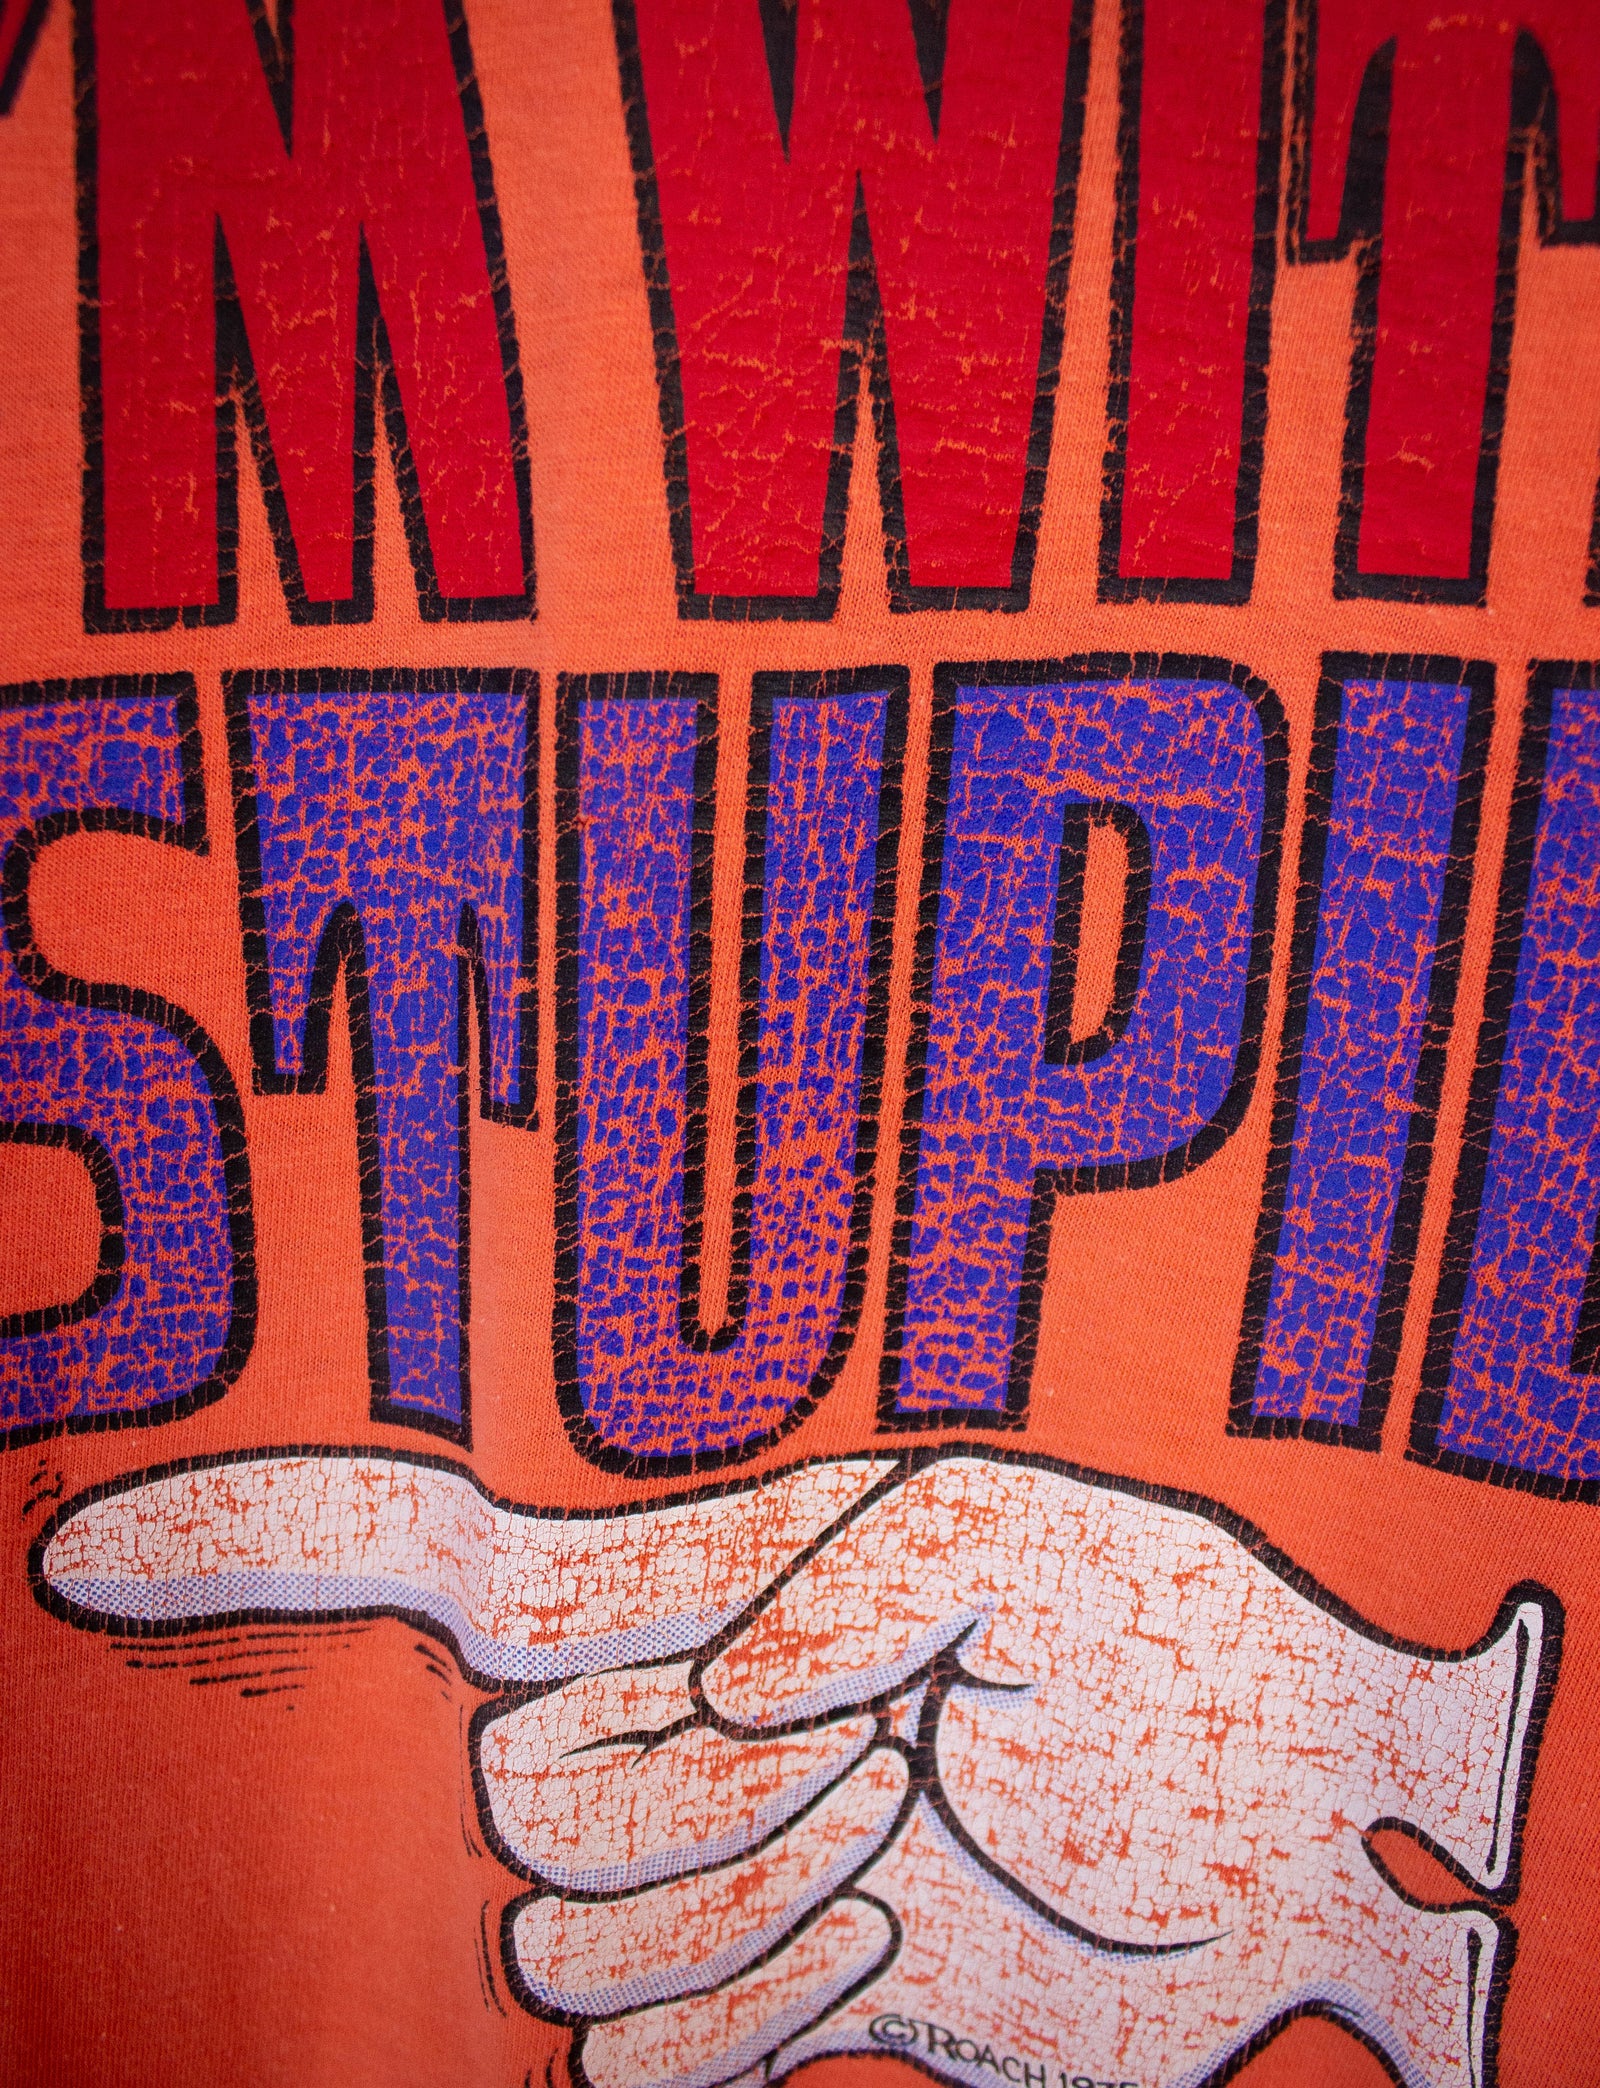 Vintage I'm With Stupid Graphic T-Shirt 1975 L